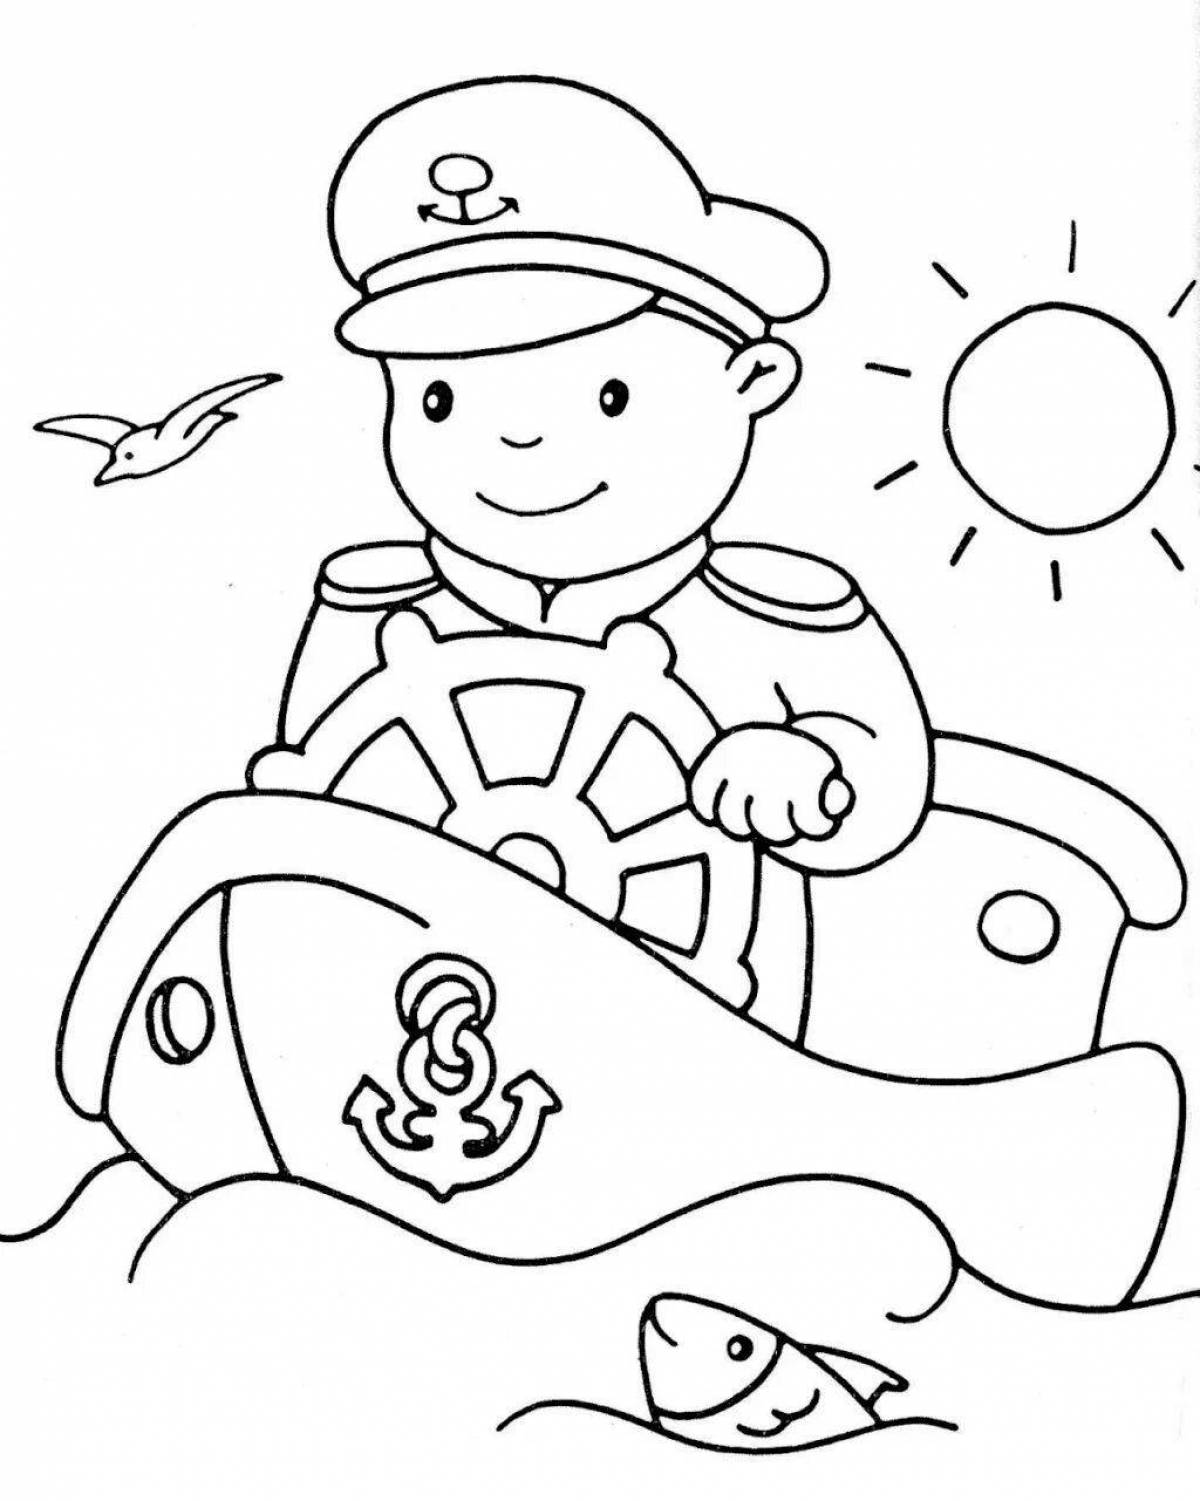 Delightful coloring page 23